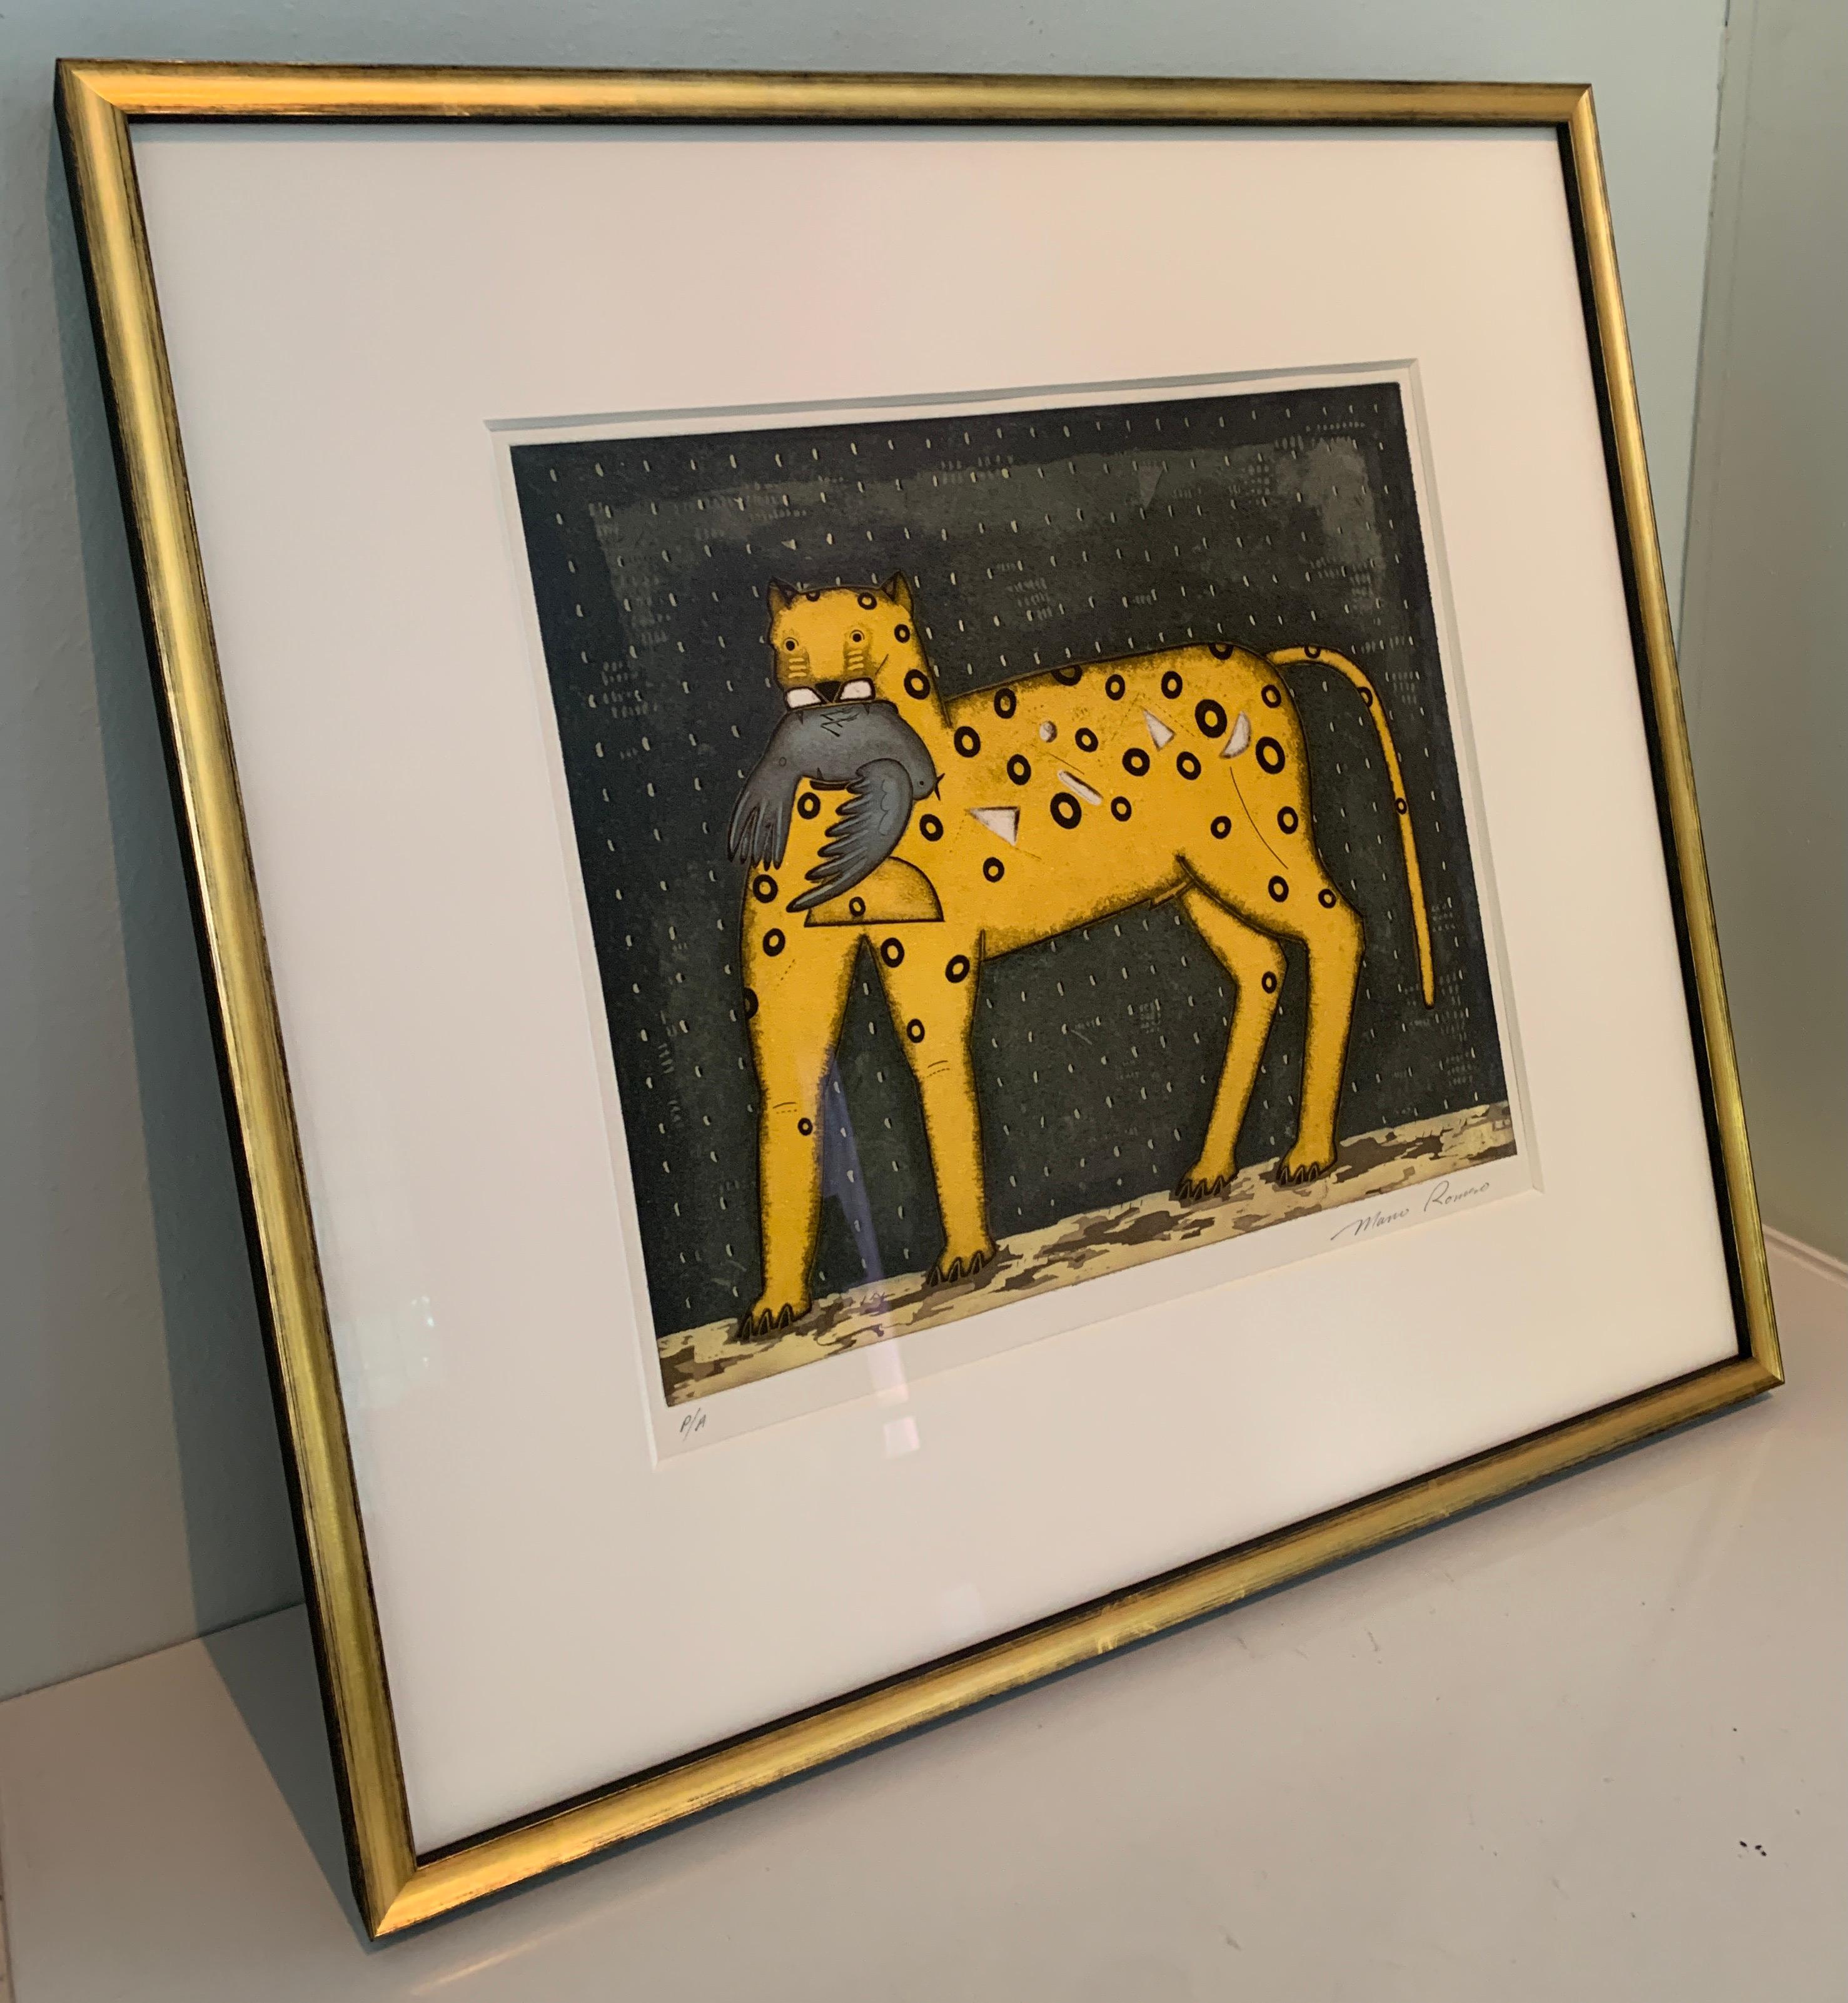 A stunning yellow spotted lion with bird. The lithograph is newly acquired in Mexico City and signed by artist, Abstract lion with spots holds a bird in the mouth. Newly Framed with glass and ready to hang.

The pieces is by Mano Romero - Mario